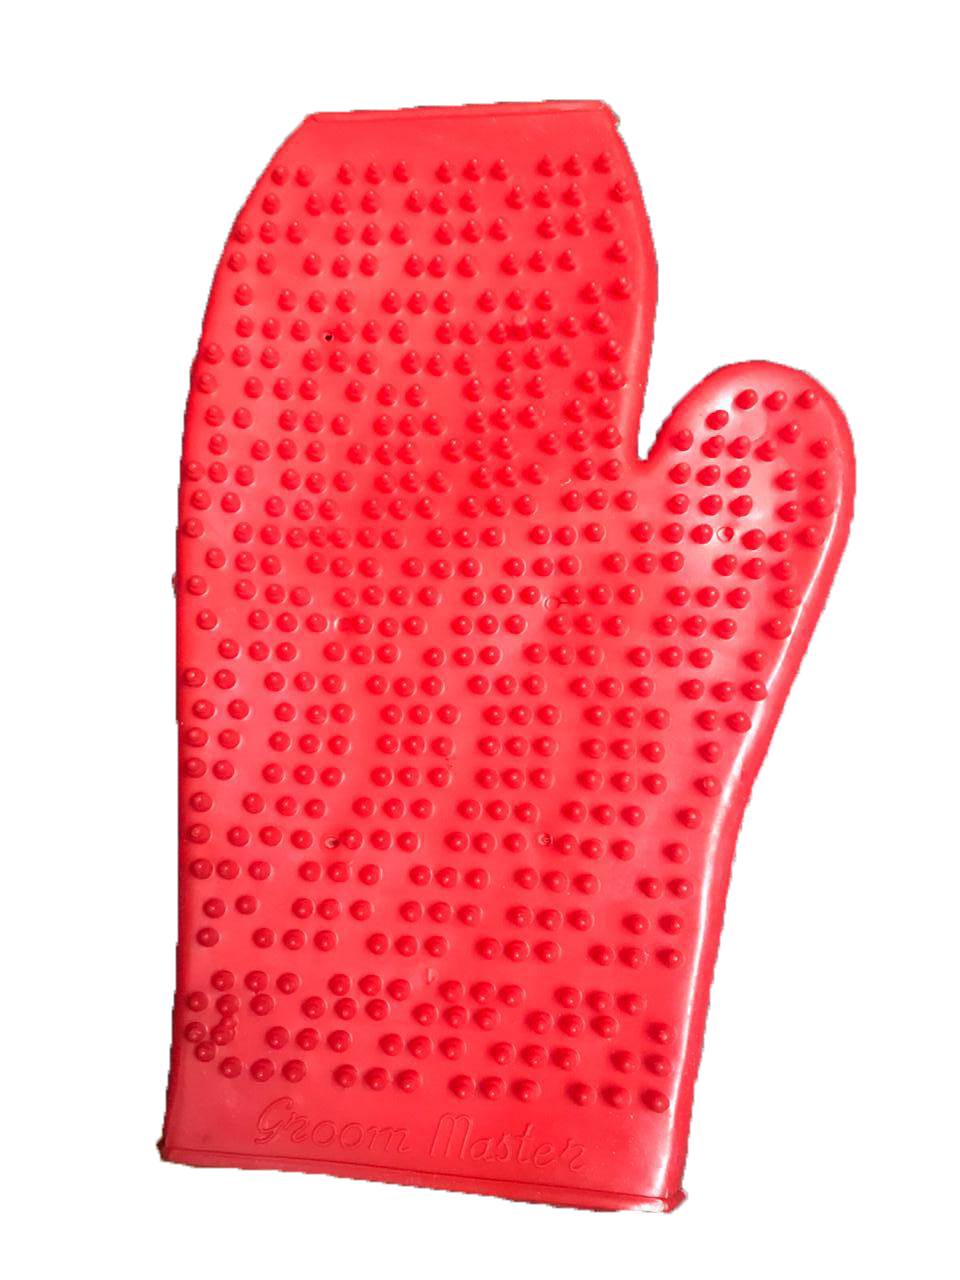 BATH GLOVES SUPER DOG IN THUMB TYPE Red